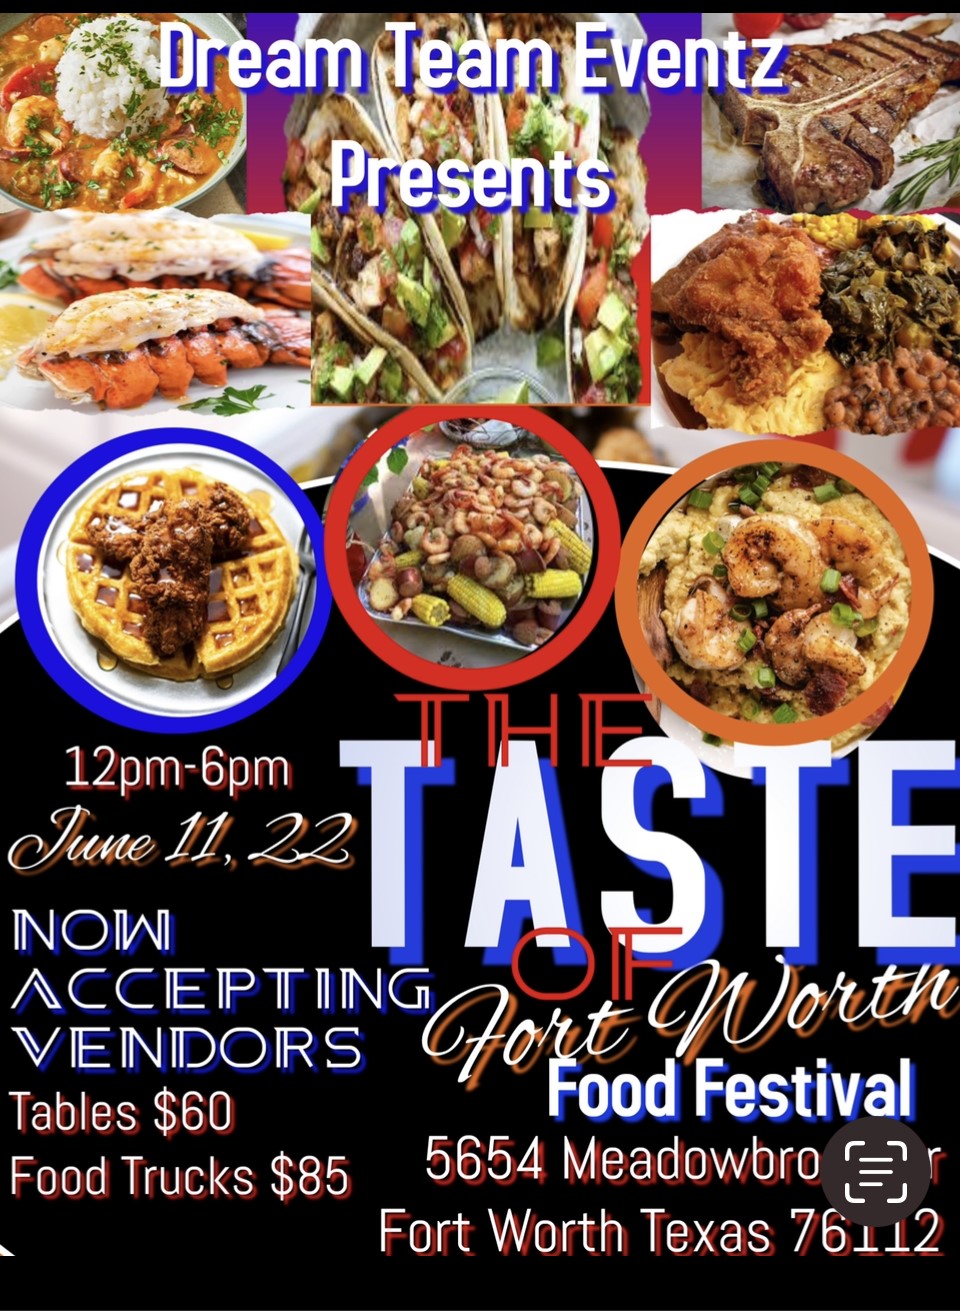 The Taste of Fort Worth Food Festival on jun. 11, 12:00@Xclusive Event Center - Buy tickets and Get information on Dream Team Events 